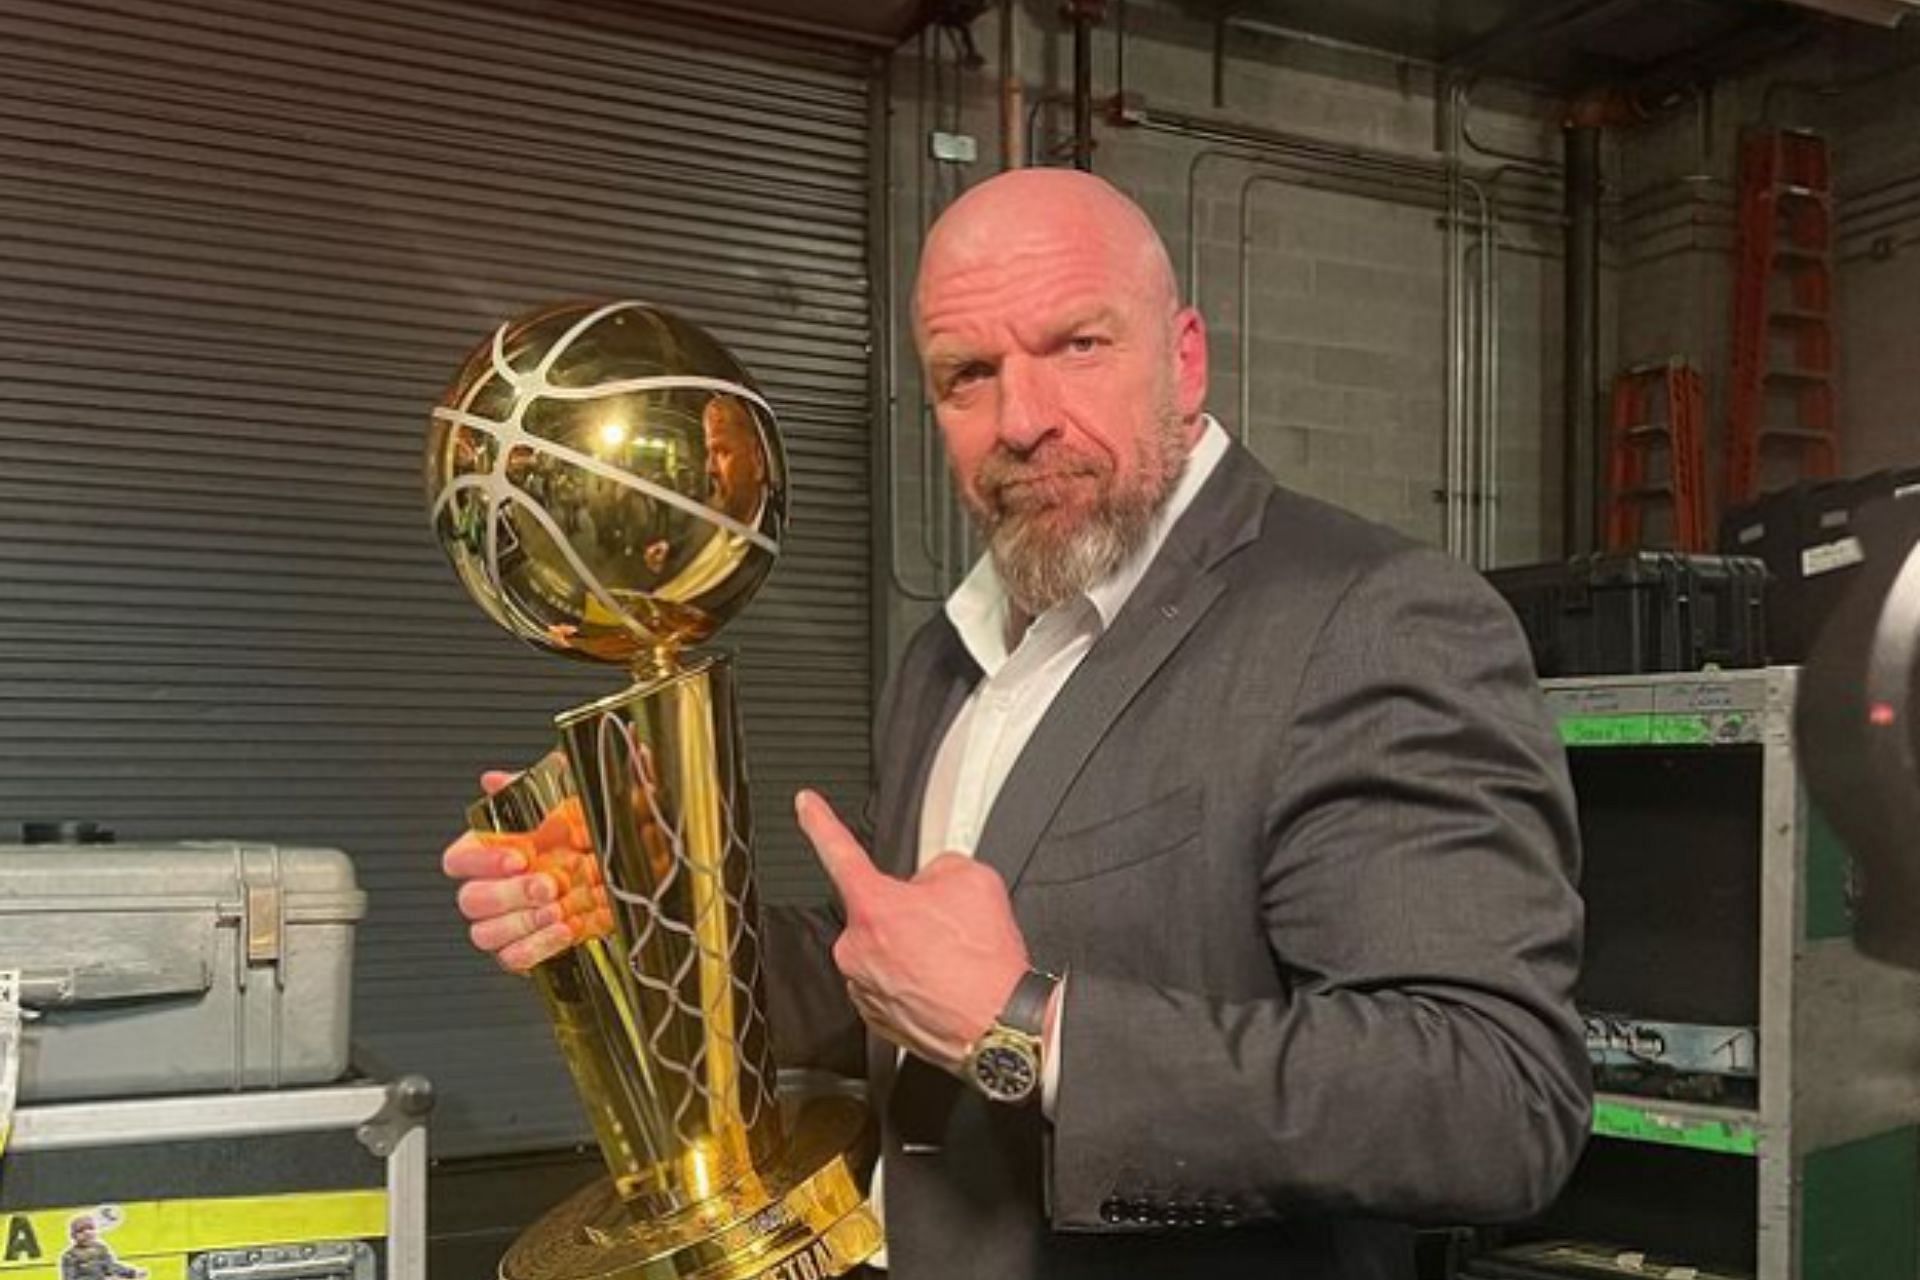 Fans think a defeated AEW wrestler could call HHH [Image Source: HHH Instagram]